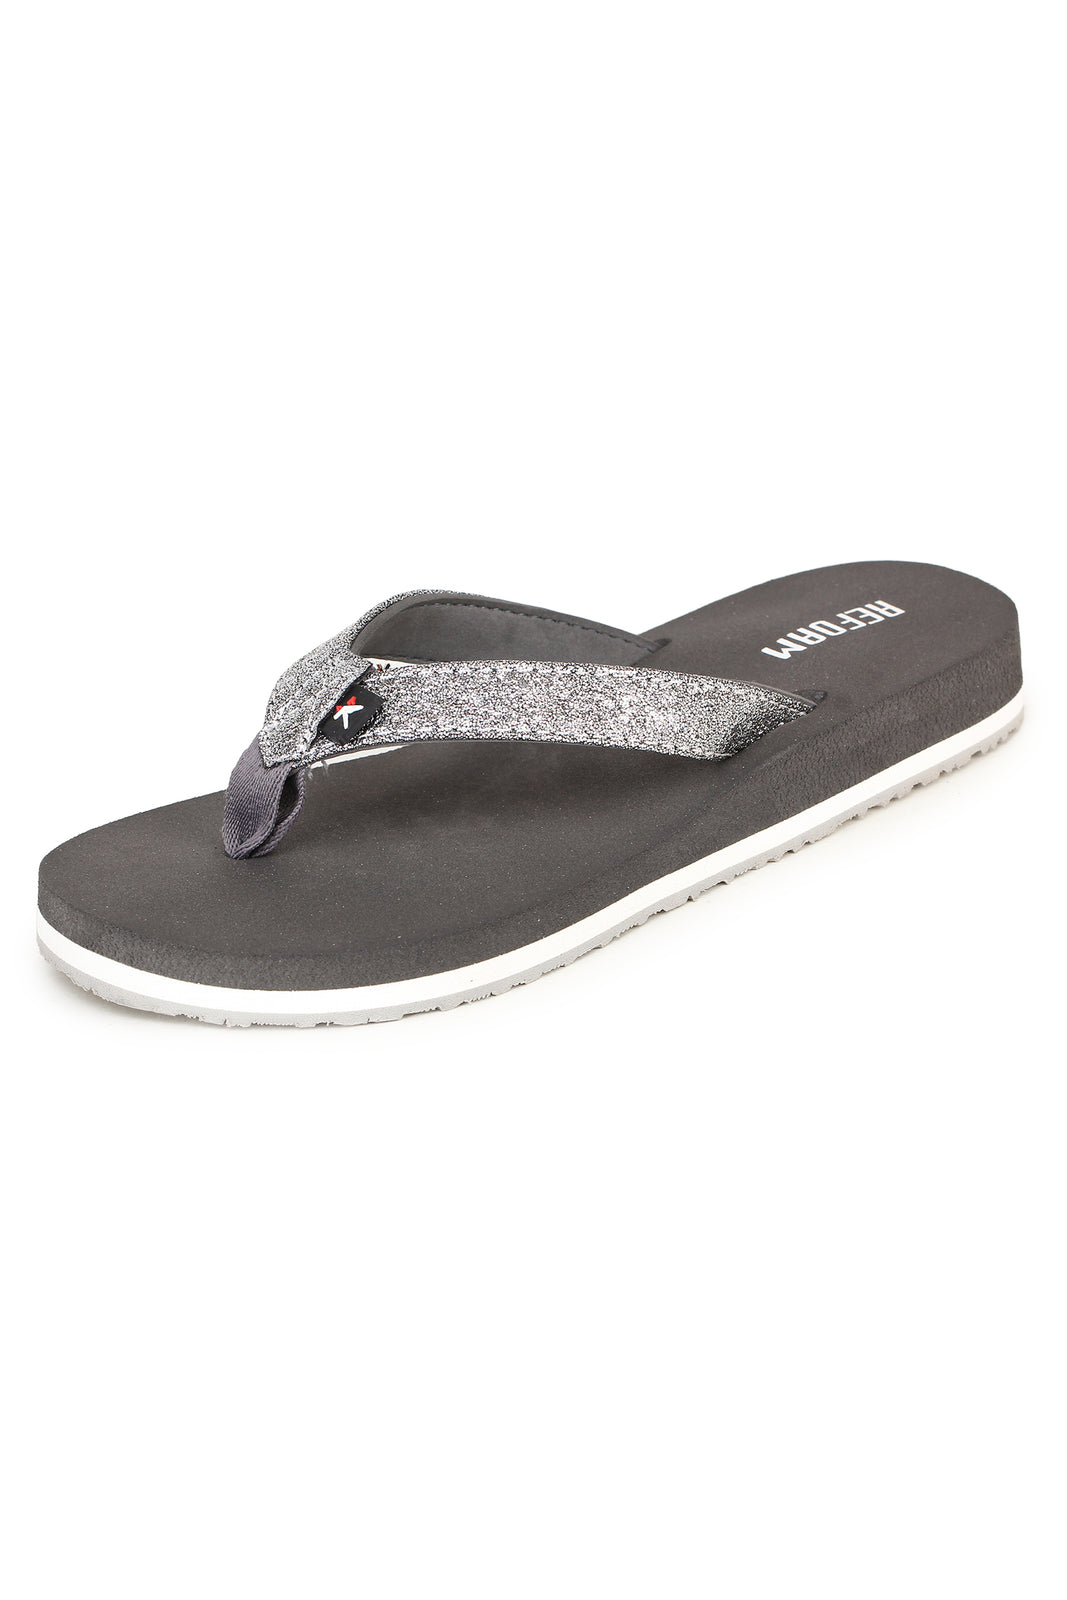 Grey Solid Rubber Slip On Casual Slippers For Women